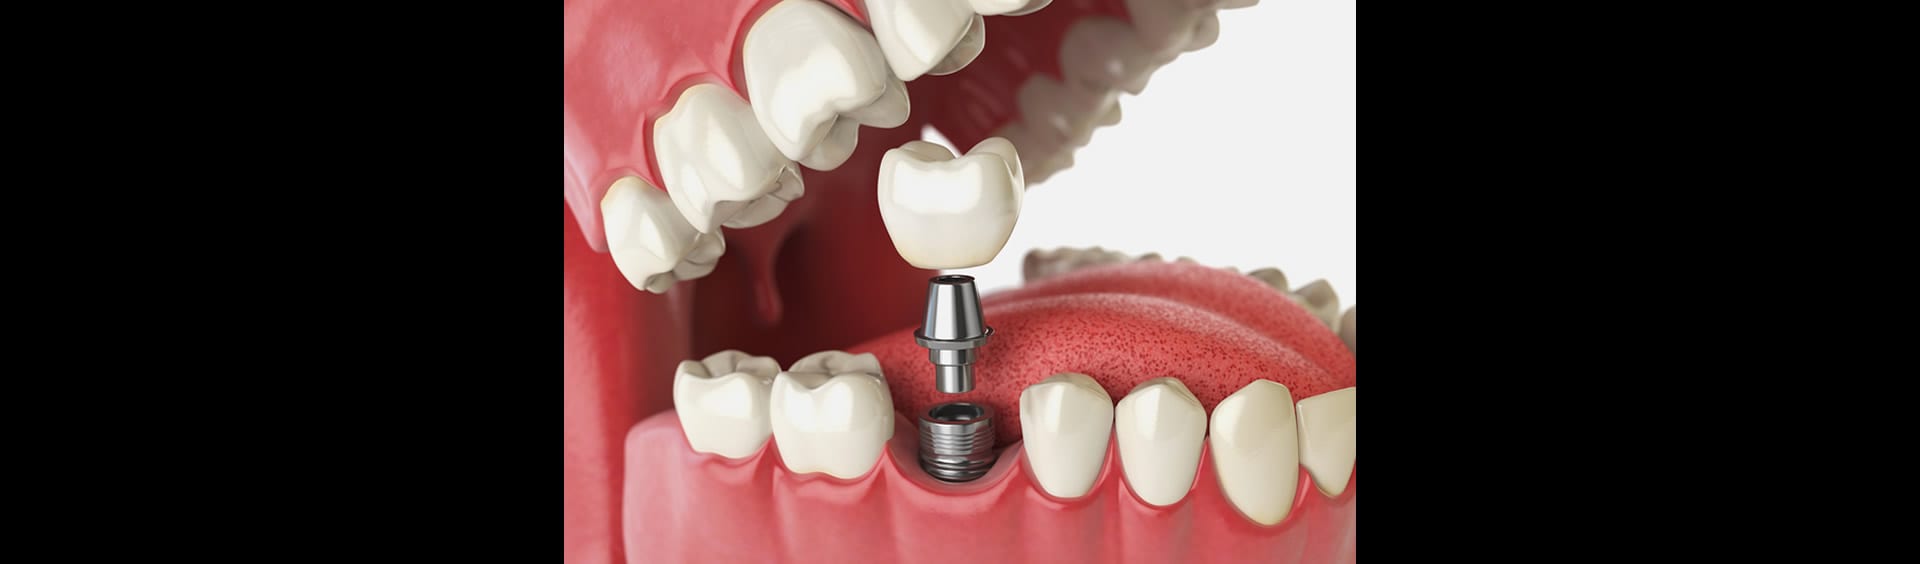 A-Dental Center - A Complete Guide to Permanent Tooth Replacement with Dental Implants